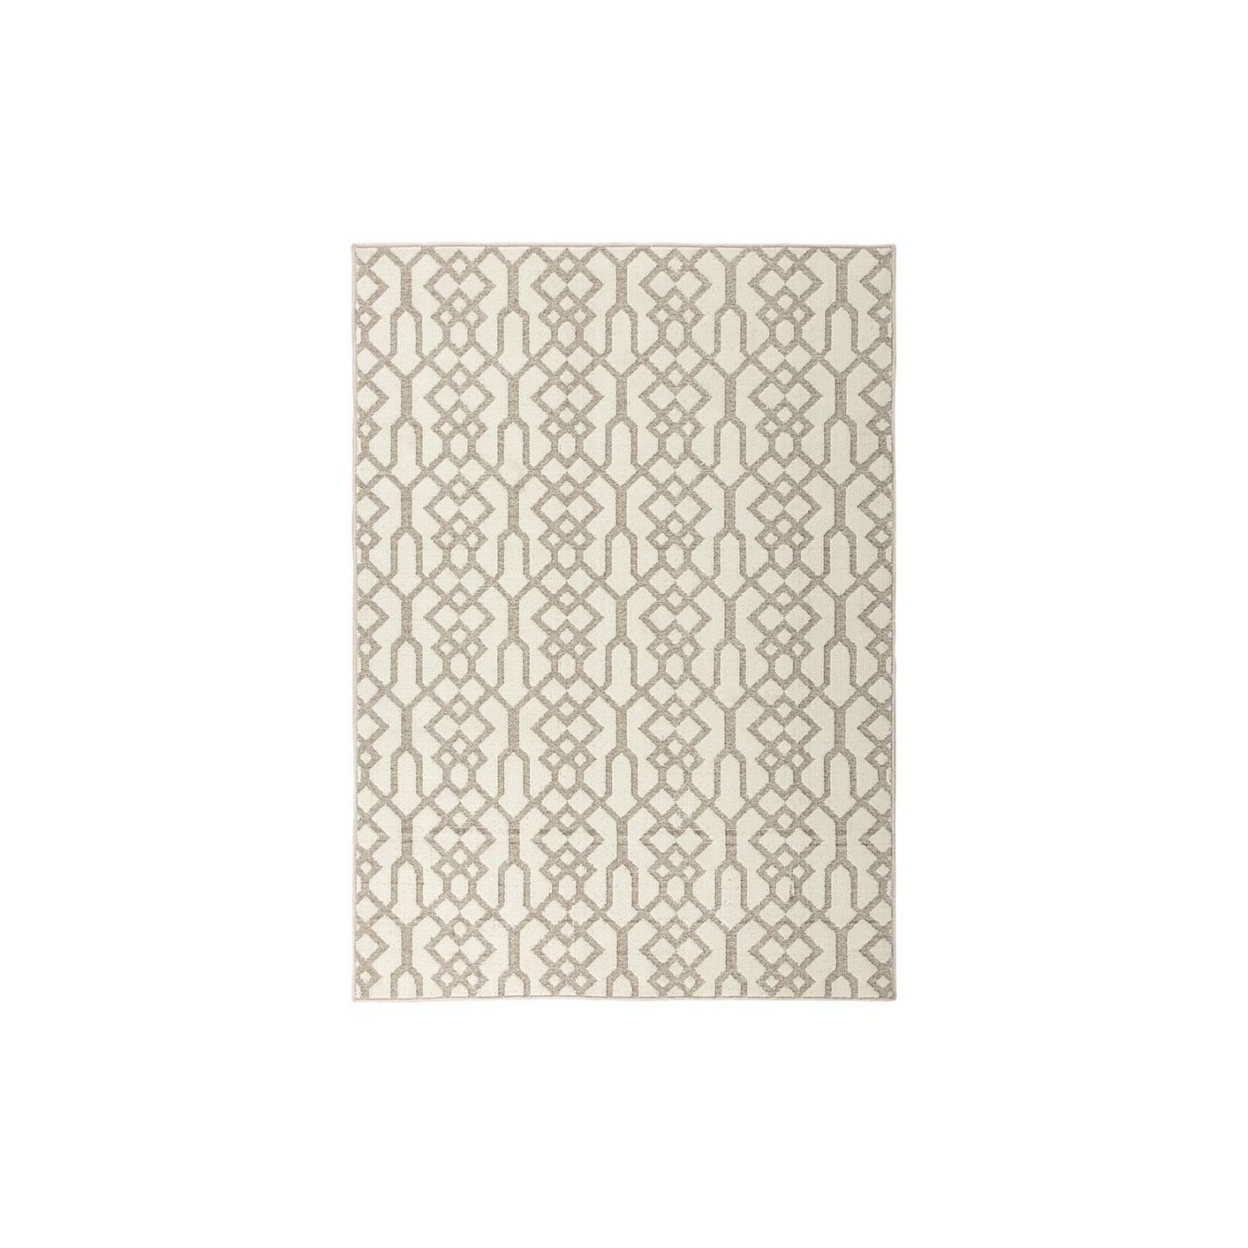 Machine Tufted Fabric Rug With Open Trellis Pattern, Large, Cream And Brown- Saltoro Sherpi